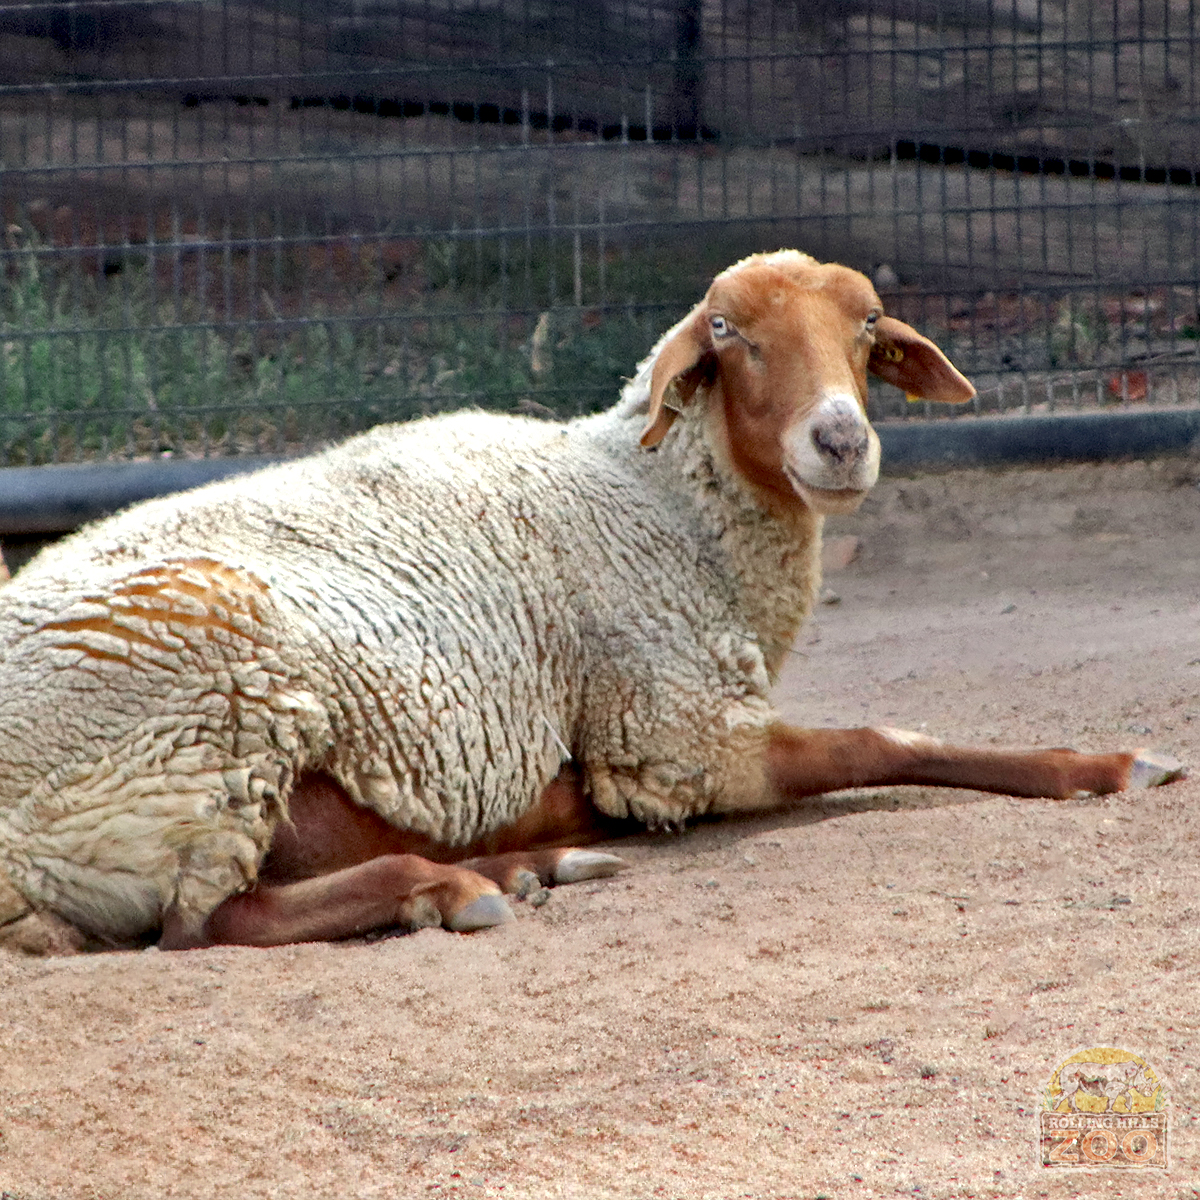 It's National #HeritageBreedsDay! DYK some of our 'farm' animals in Kid's Country are actually rare heritage breeds facing extinction? Visit #RollingHillsZoo to meet these rare breeds and learn about their importance. 🐐🐑🐓🐄 #WeAreAZA #WhyZoosMatter